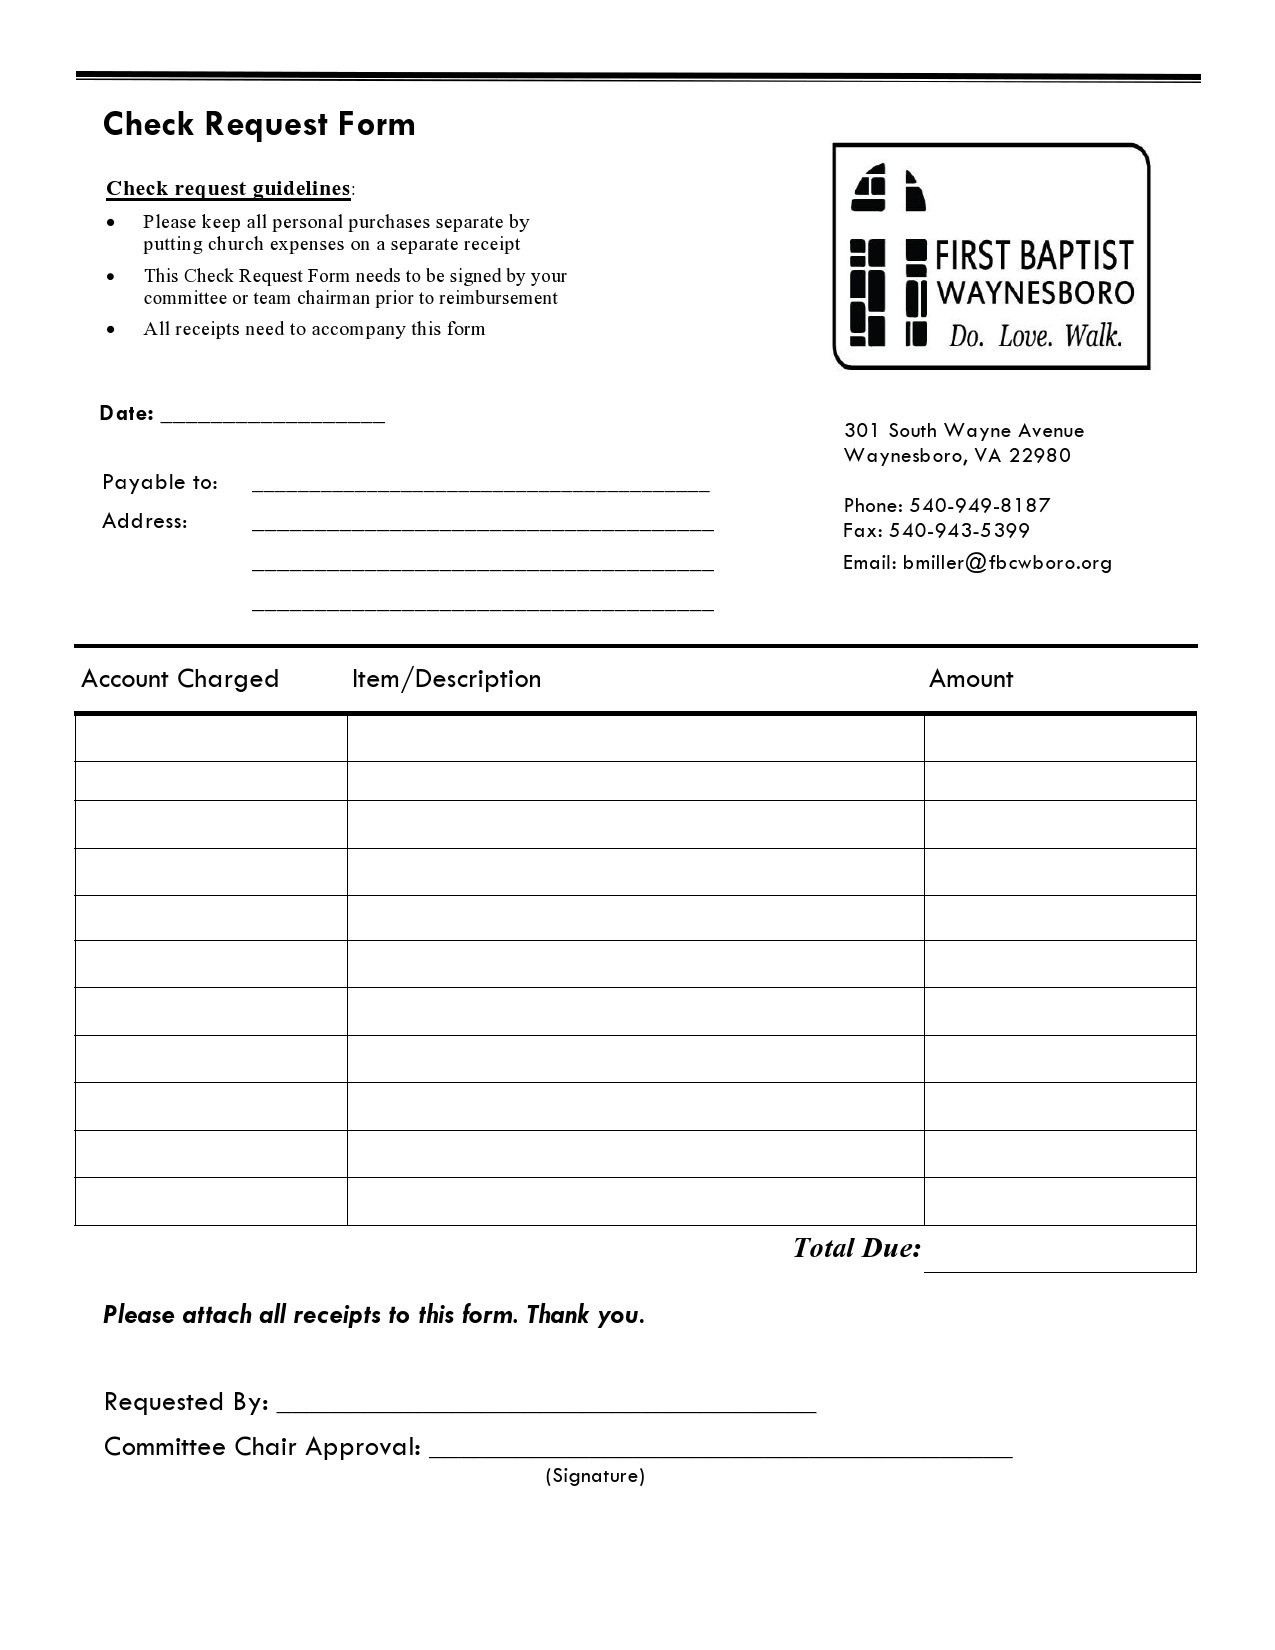 50-free-check-request-forms-word-excel-pdf-templatelab